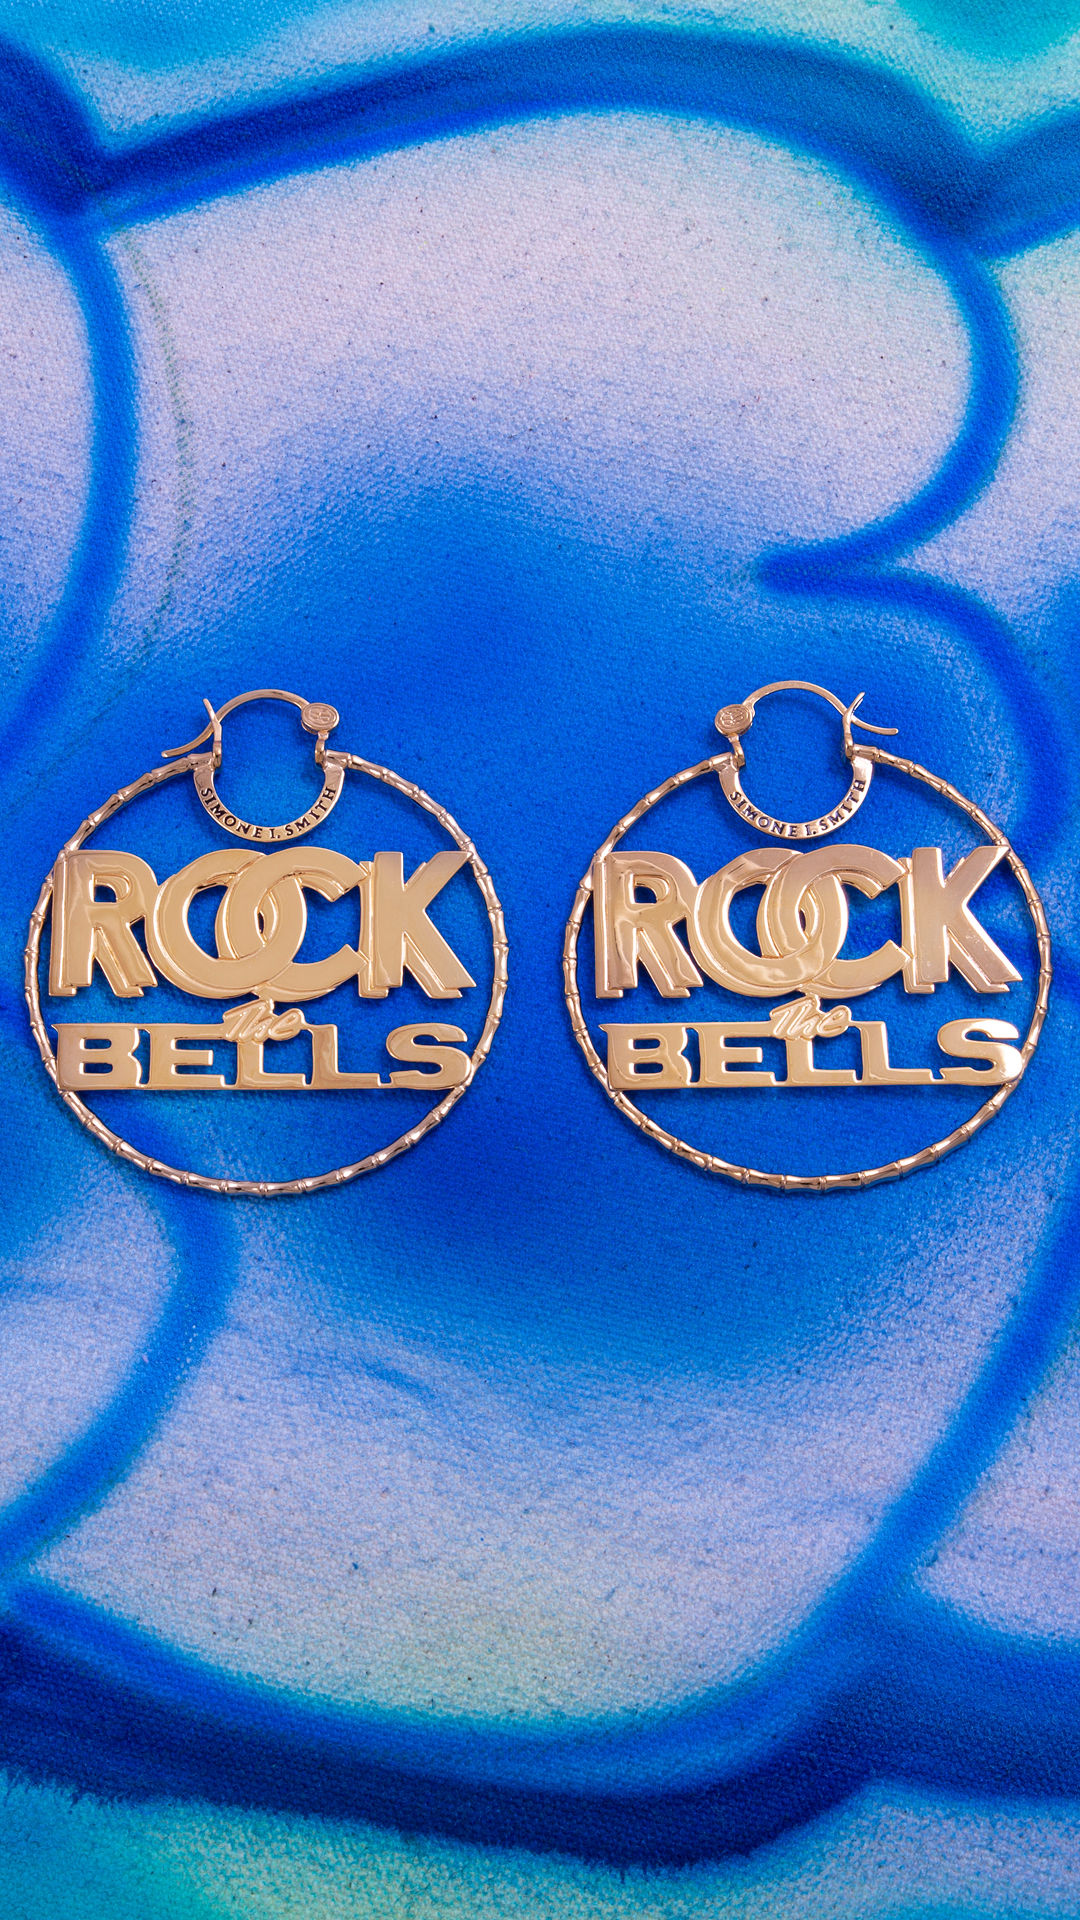 Rock the bell